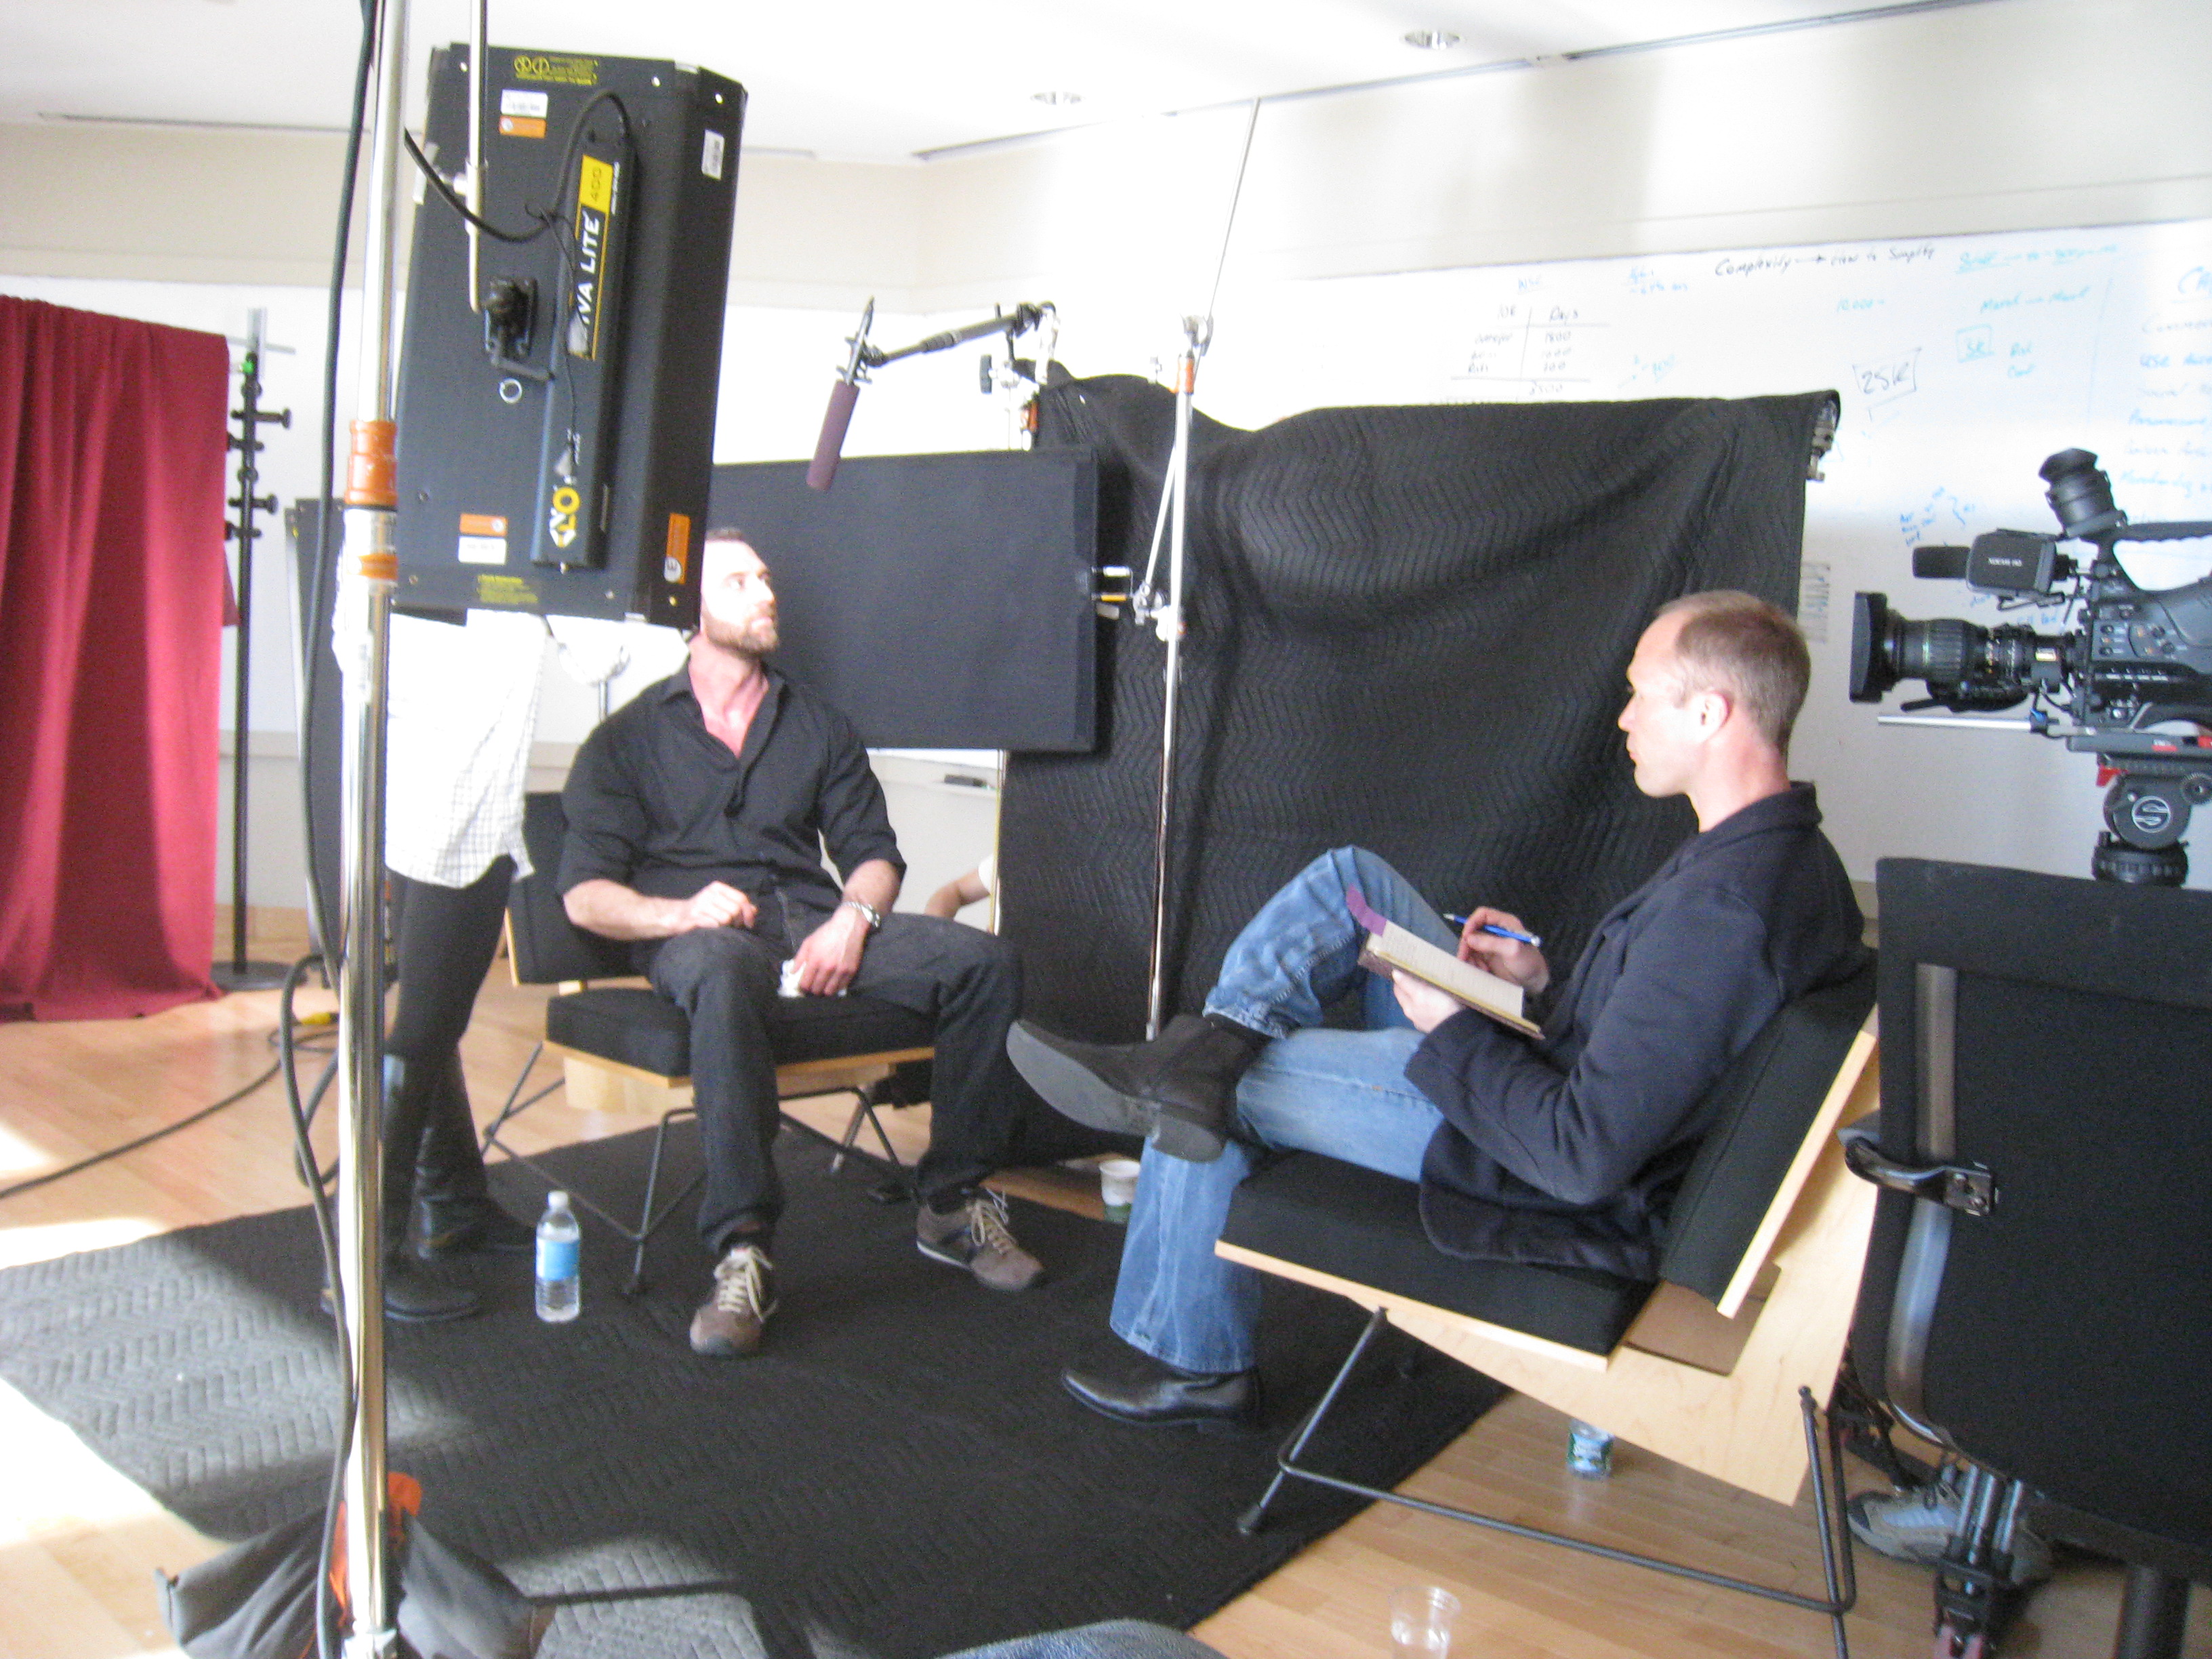 Director Jim Houck, right, on set at Rolling Stone magazine.